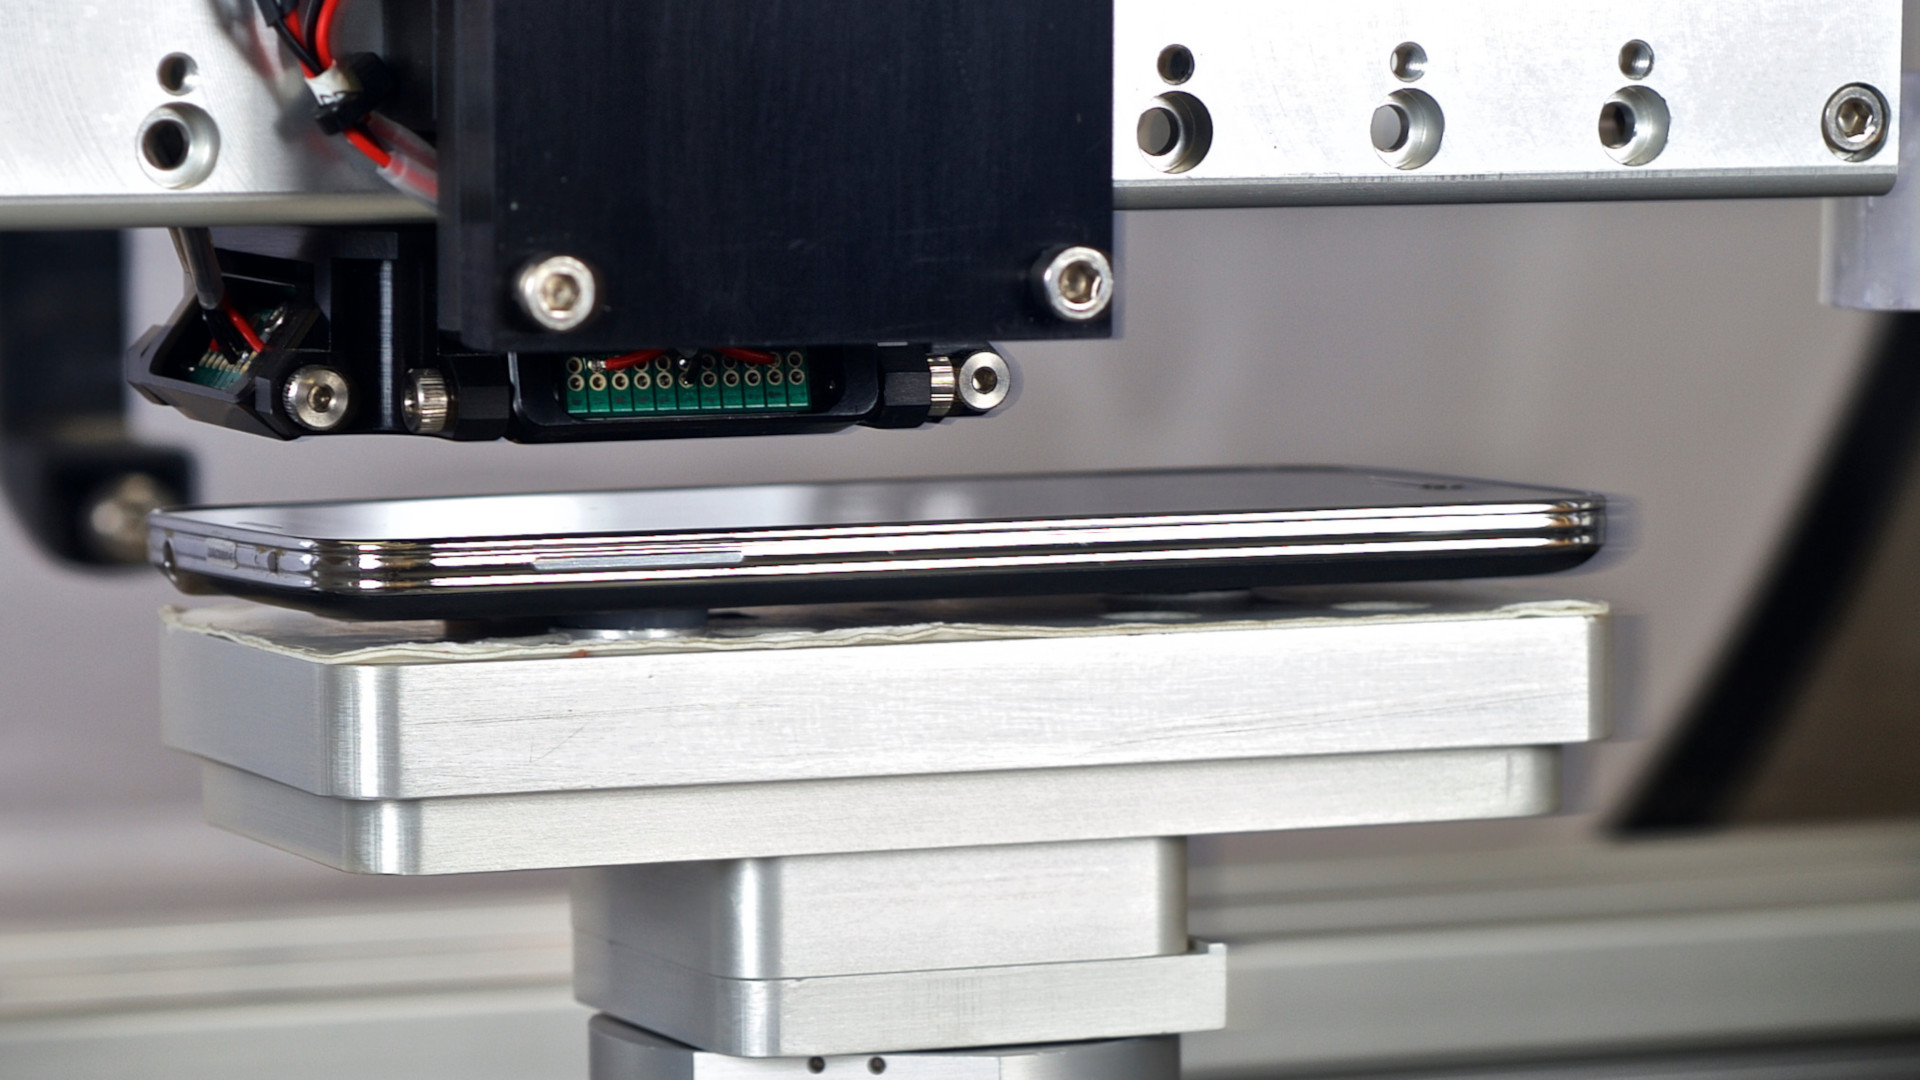 High-speed, non-contact measurement systems use state-of-the-art sensors to measure complex parts in seconds and improve manufactured part quality.